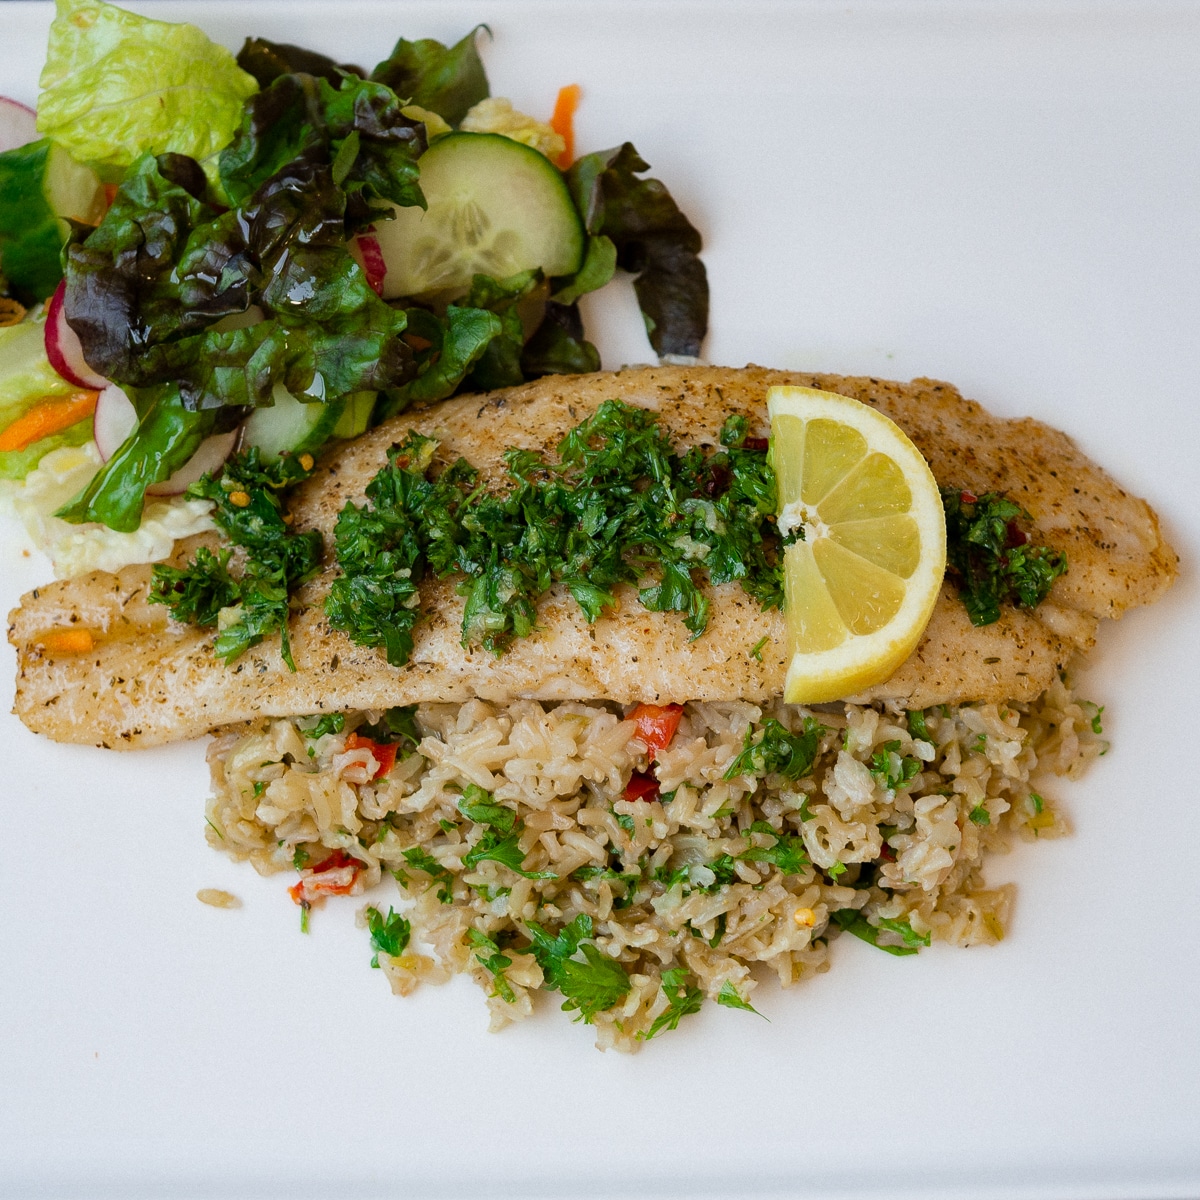 Fried fish fillet with Rice pilaf, Easy and delicious